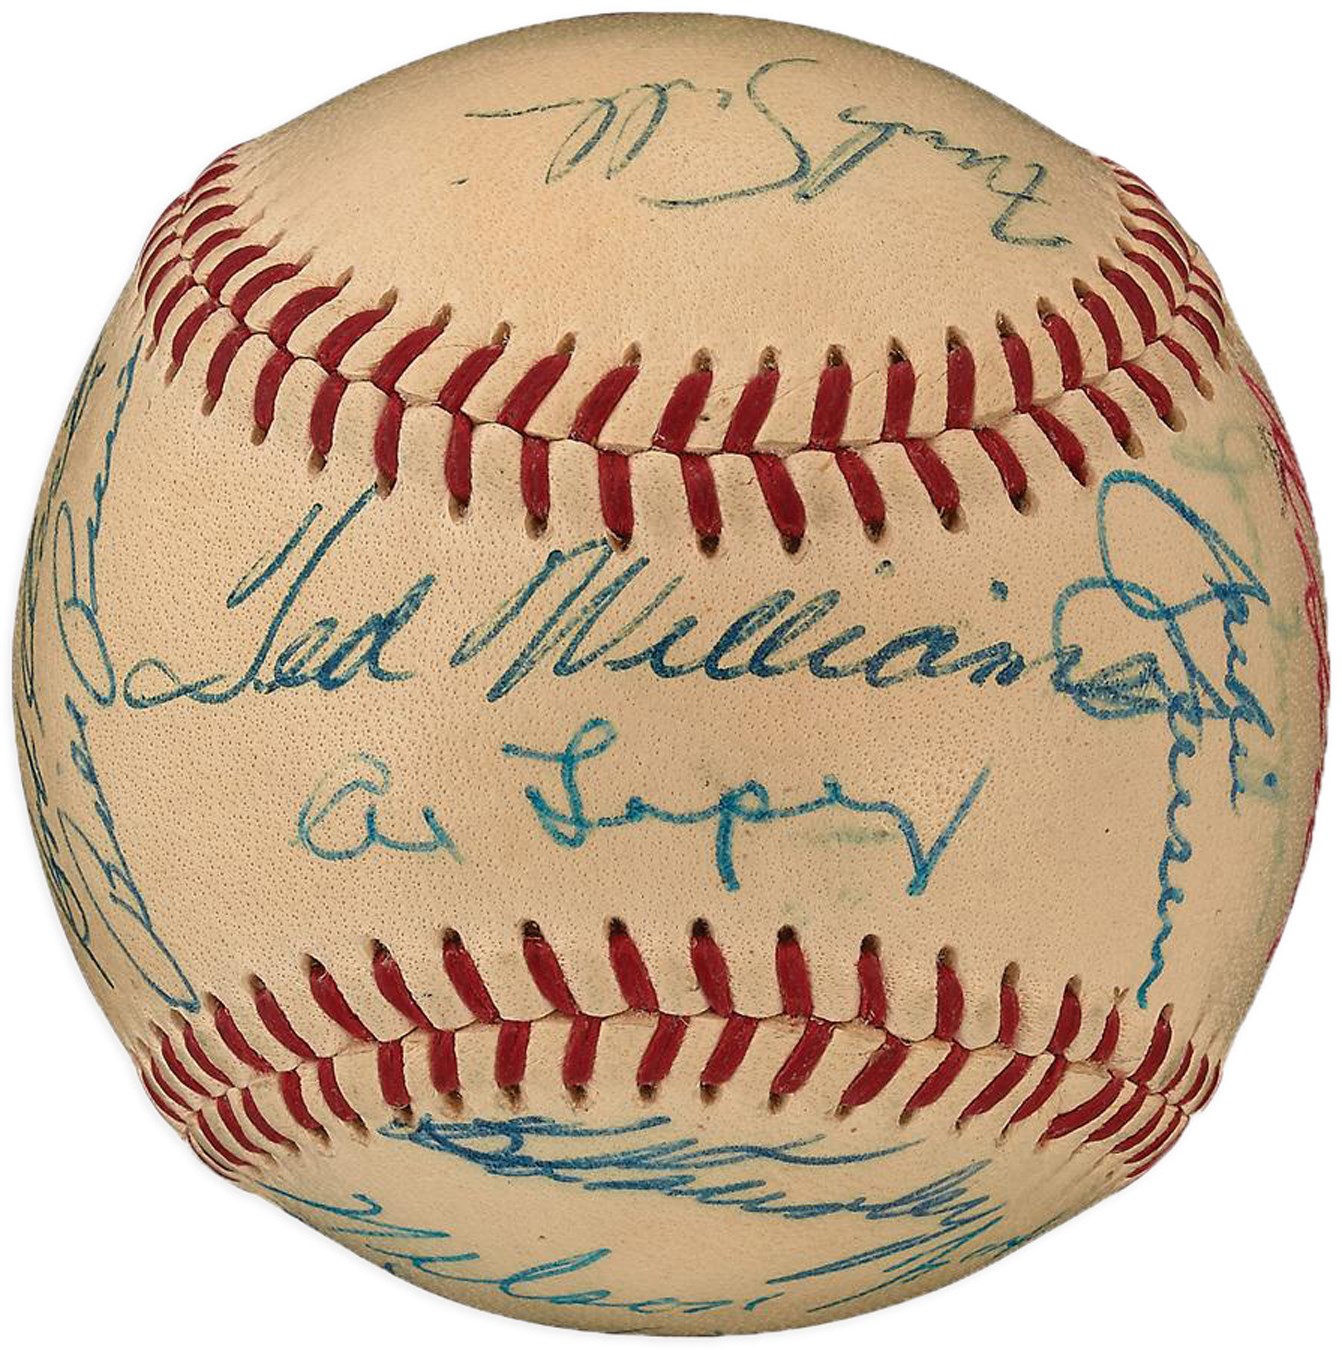 1955 American League All-Star Team-Signed Baseball - PSA Authenticated (Kluszewski Collection)